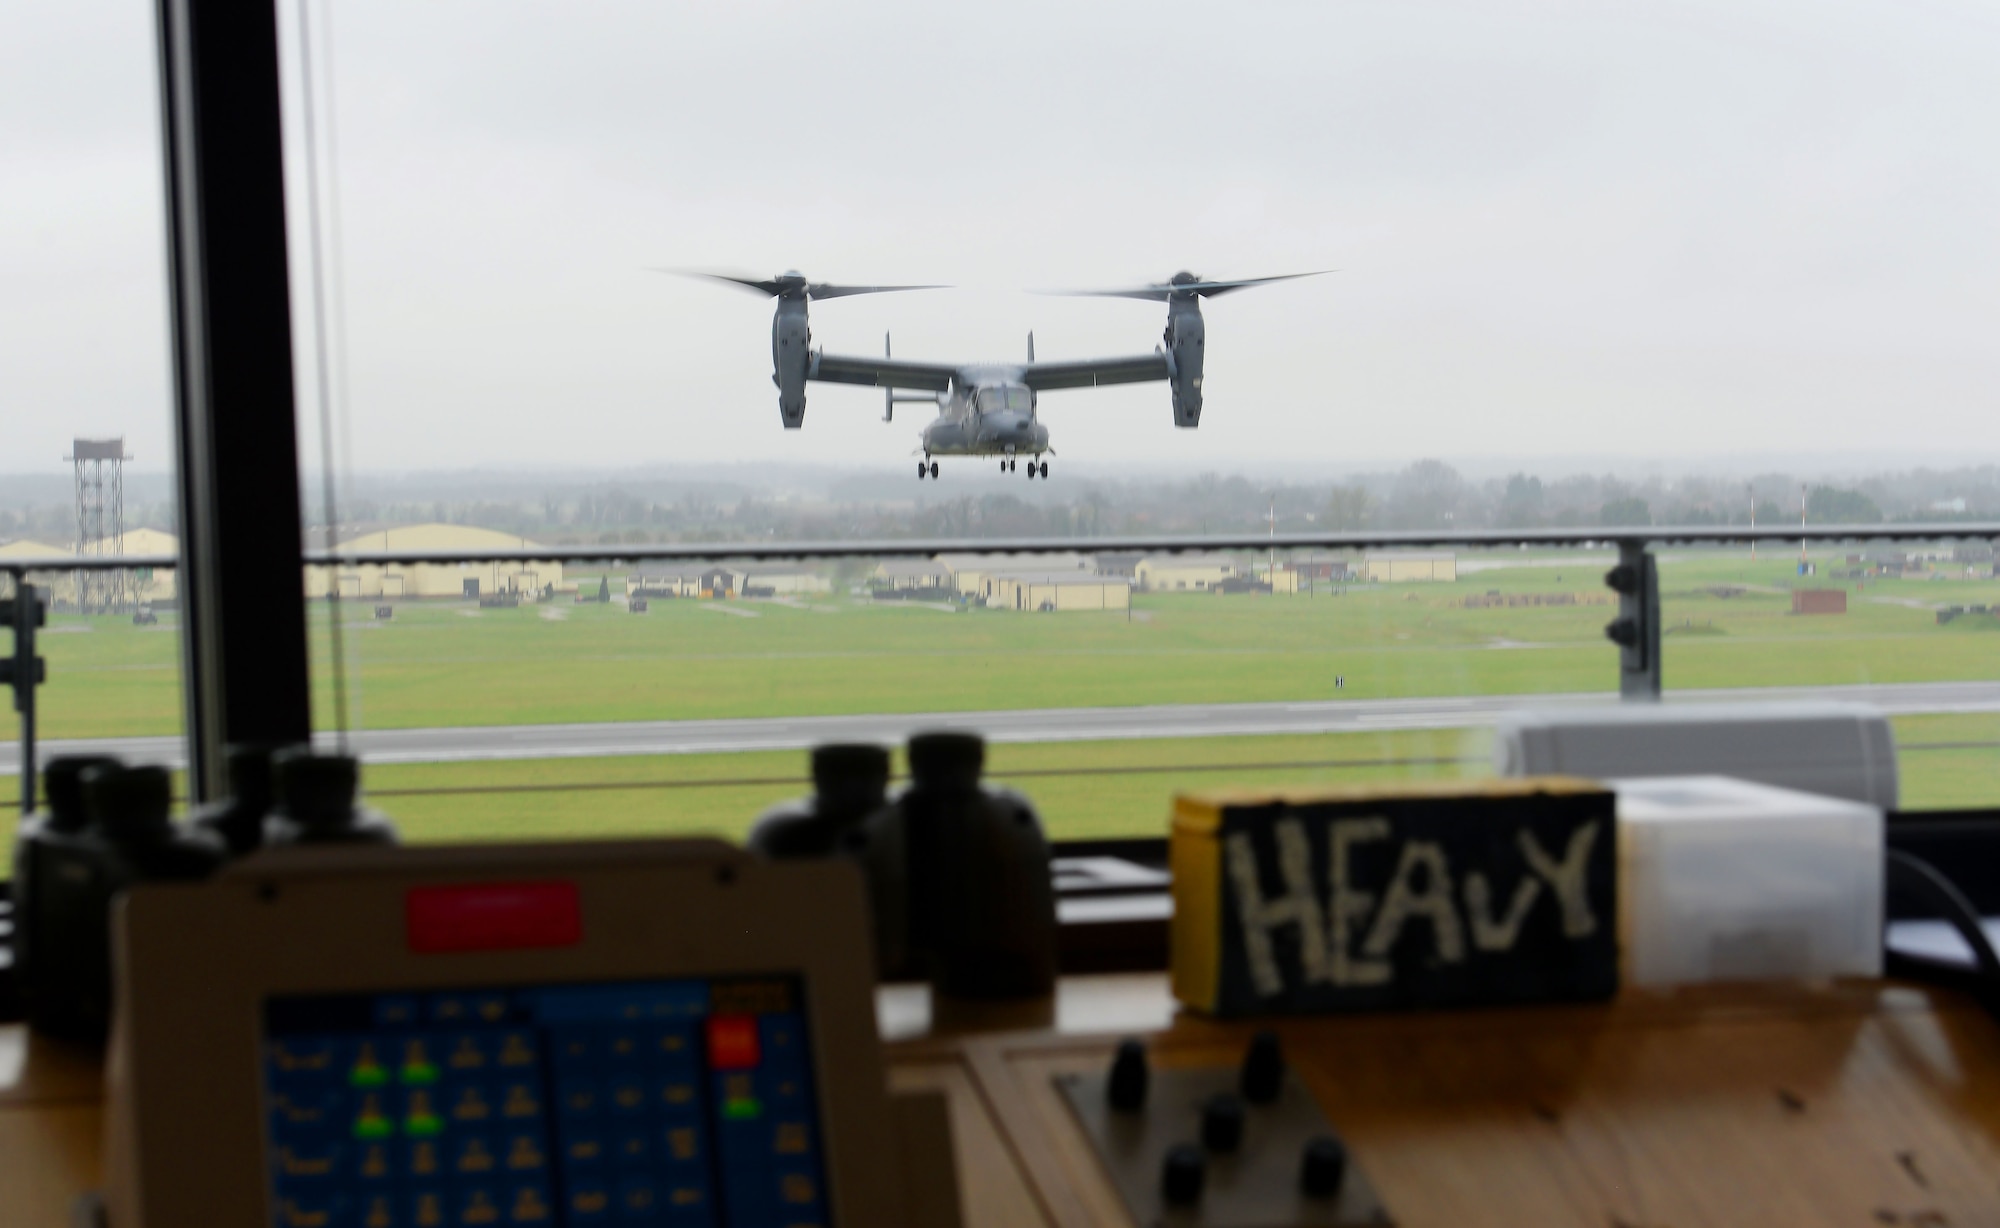 A U.S. Air Force CV-22 Osprey assigned to 352d Special Operations Wing passes the air traffic control tower during landing at RAF Mildenhall, England, April 9, 2018. The ever-watching eye of the air traffic controllers from the 100th Operations Support Squadron keeps our skies and aircraft safe. (U.S. Air Force photo by Airman 1st Class Alexandria Lee)